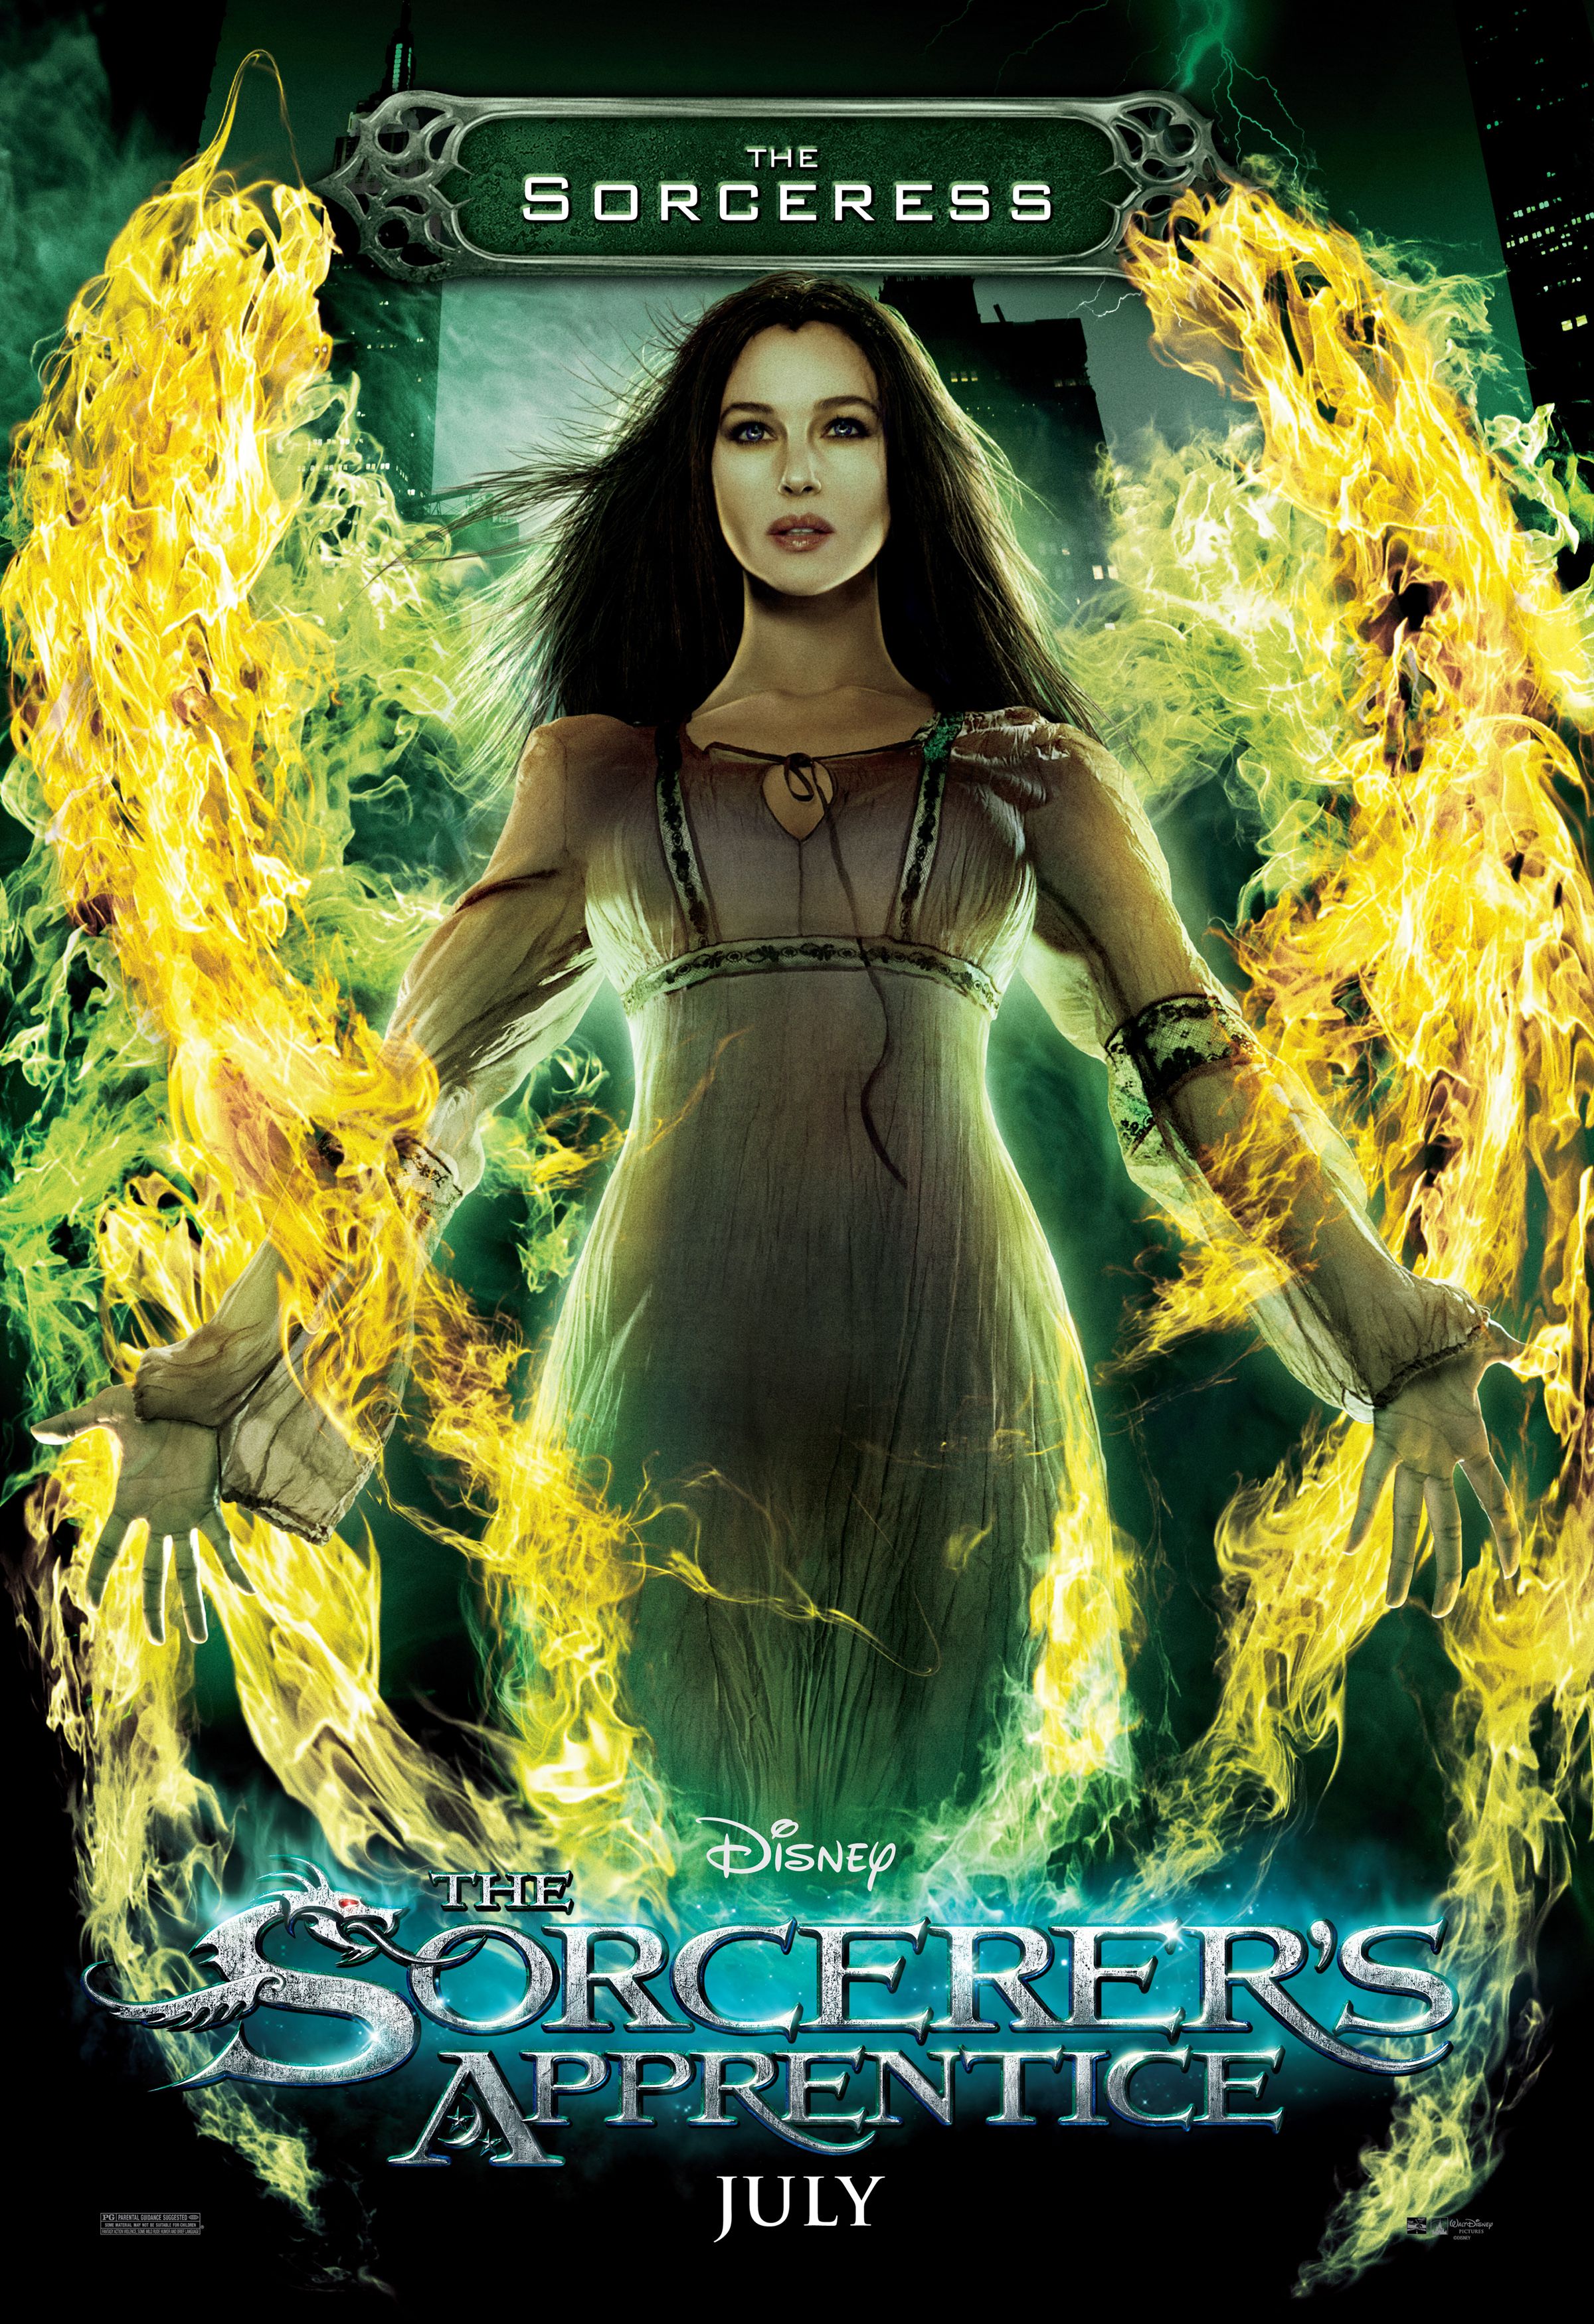 The Sorcerer's Apprentice Veronica character poster